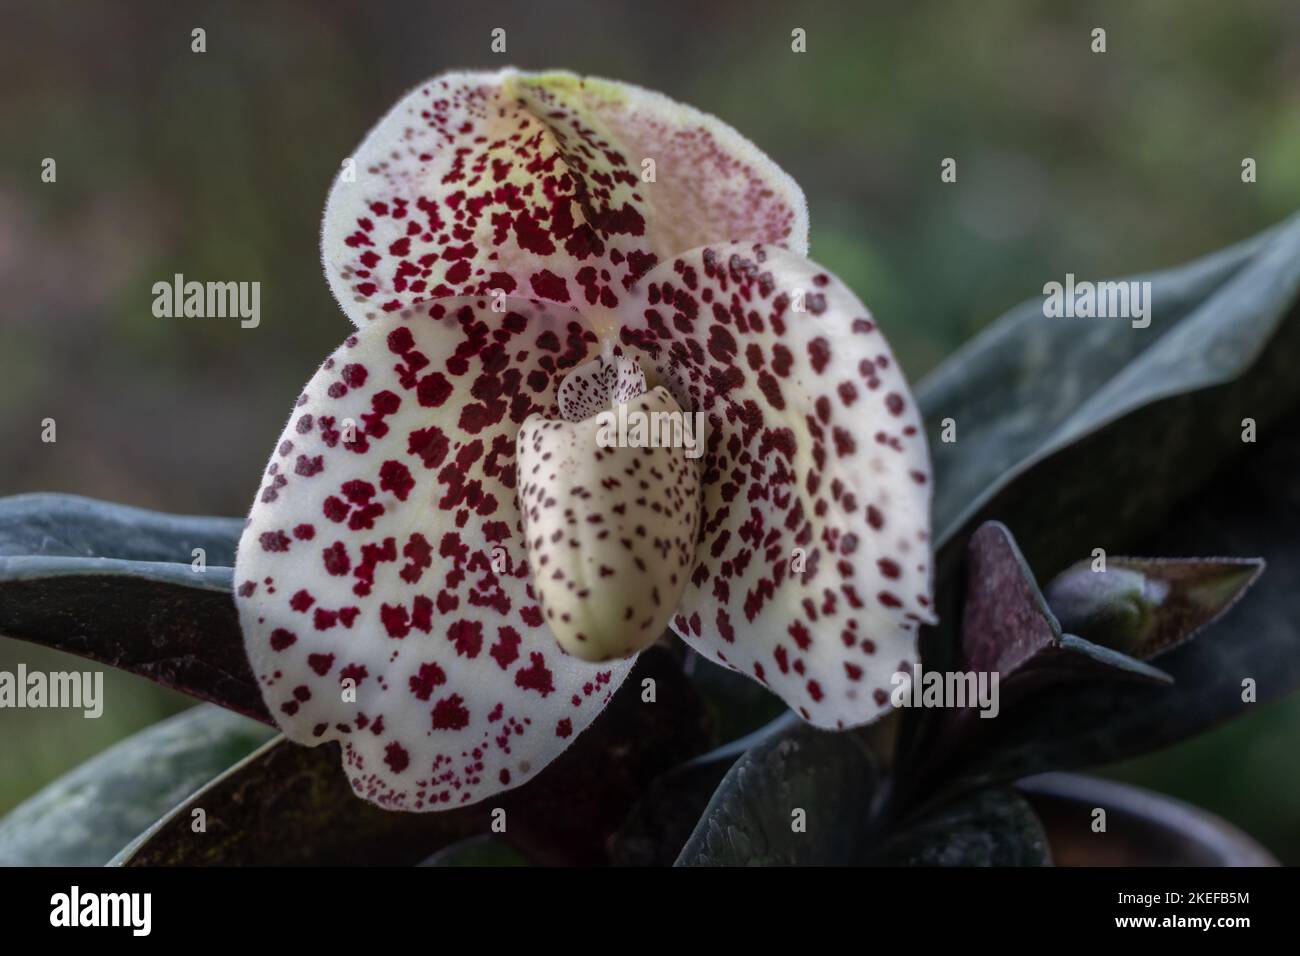 Closeup view of creamy white with purple red spots flower of lady slipper orchid species paphiopedilum bellatulum isolated on natural background Stock Photo